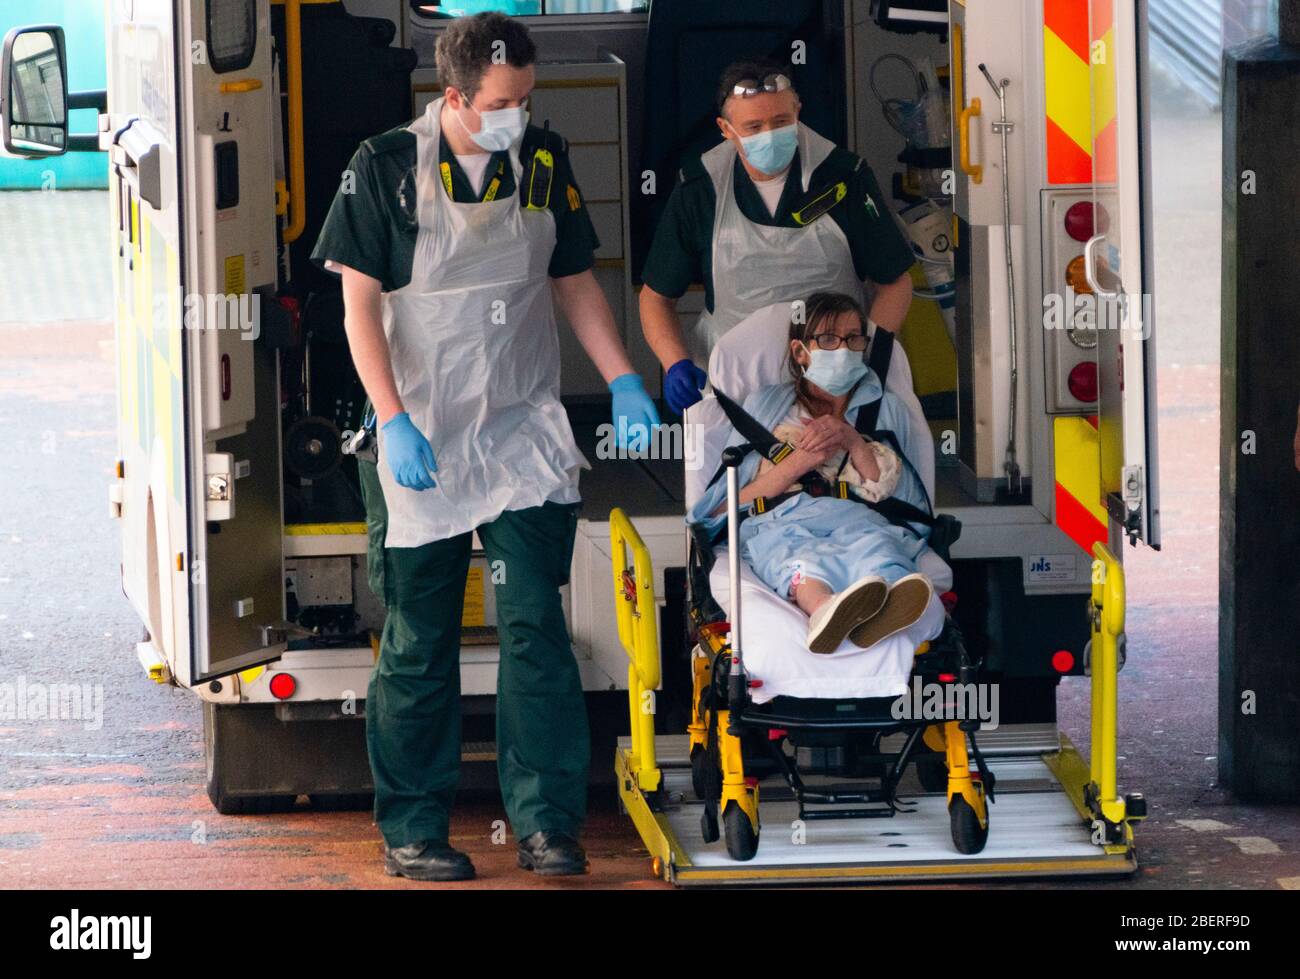 Glasgow, Scotland, UK. 15 April 2020. Patient is unloaded from ambulance by staff wearing PPE at A&E department at Glasgow Royal Infirmary. Iain Masterton/Alamy Live News Stock Photo